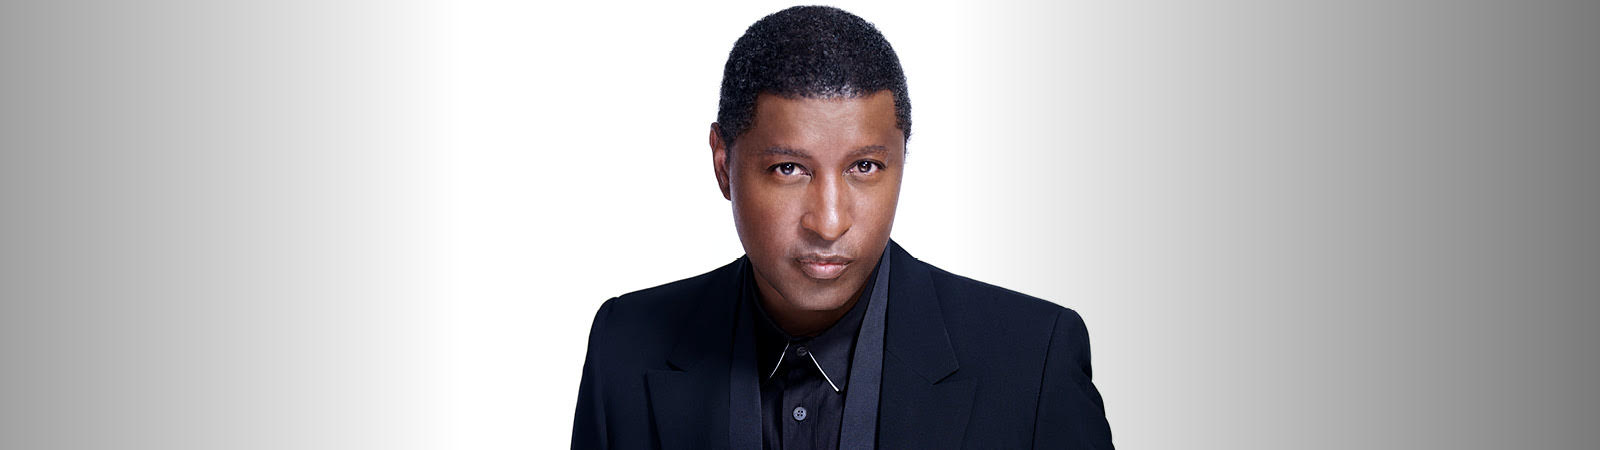 Giveaway! Enter to Win 2 Tickets to See Kenny “Babyface” Edmonds at